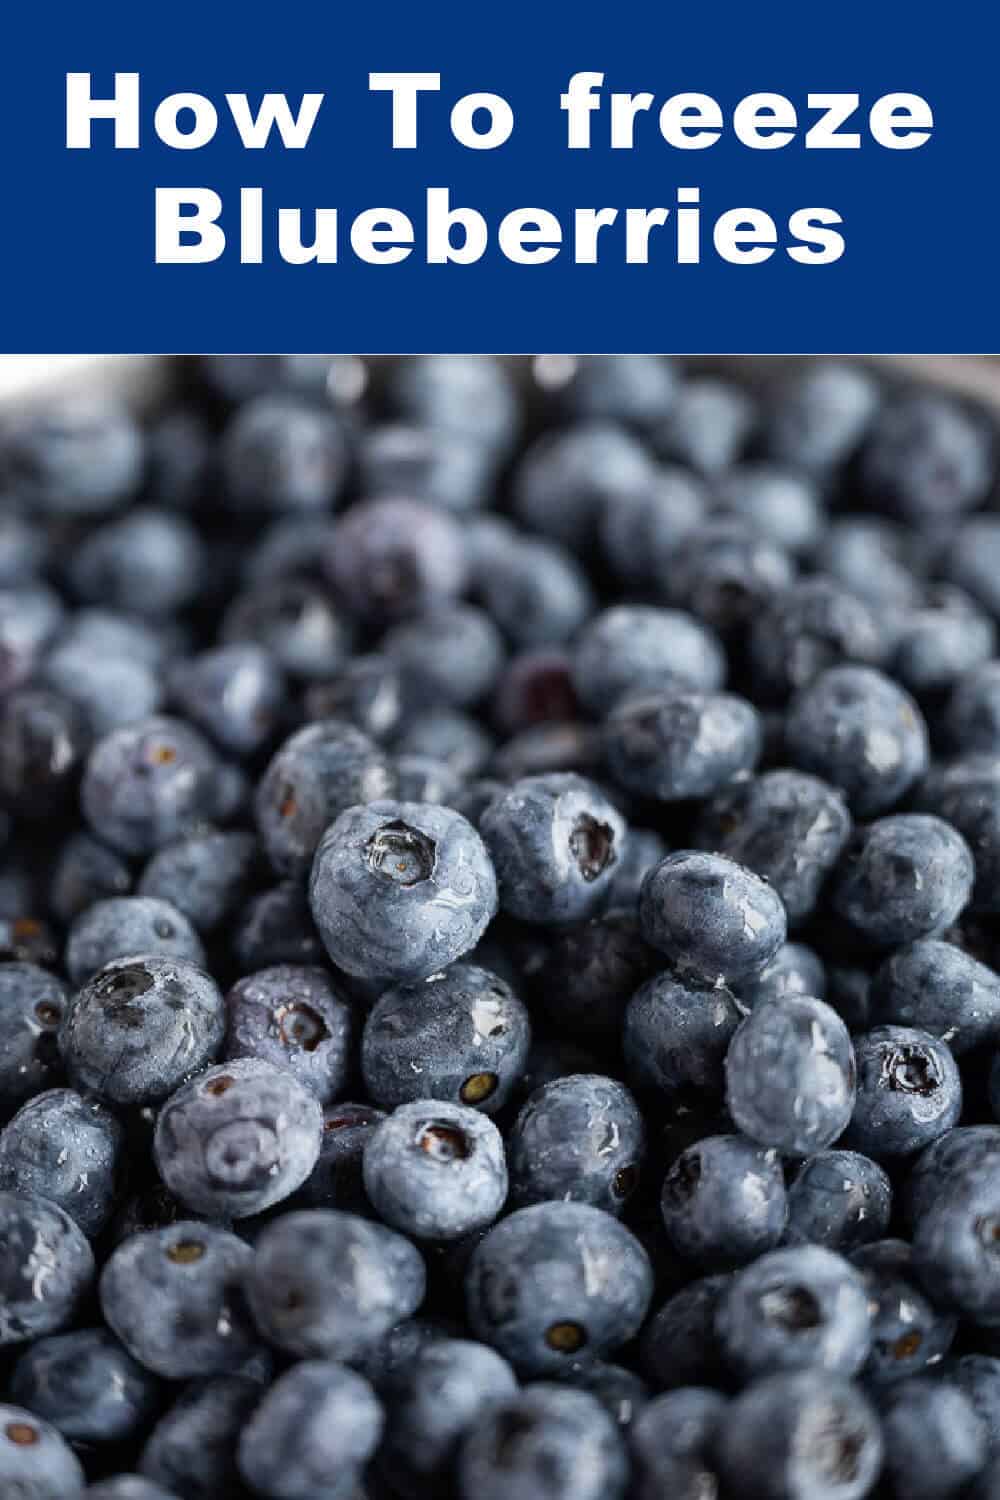 Enjoy blueberries when they are in season and enjoy them all year! Learn how to freeze blueberries when they are fresh and plentiful- they are the easiest fruit to freeze, there's no cutting stems off, peeling, or slicing. via @artfrommytable